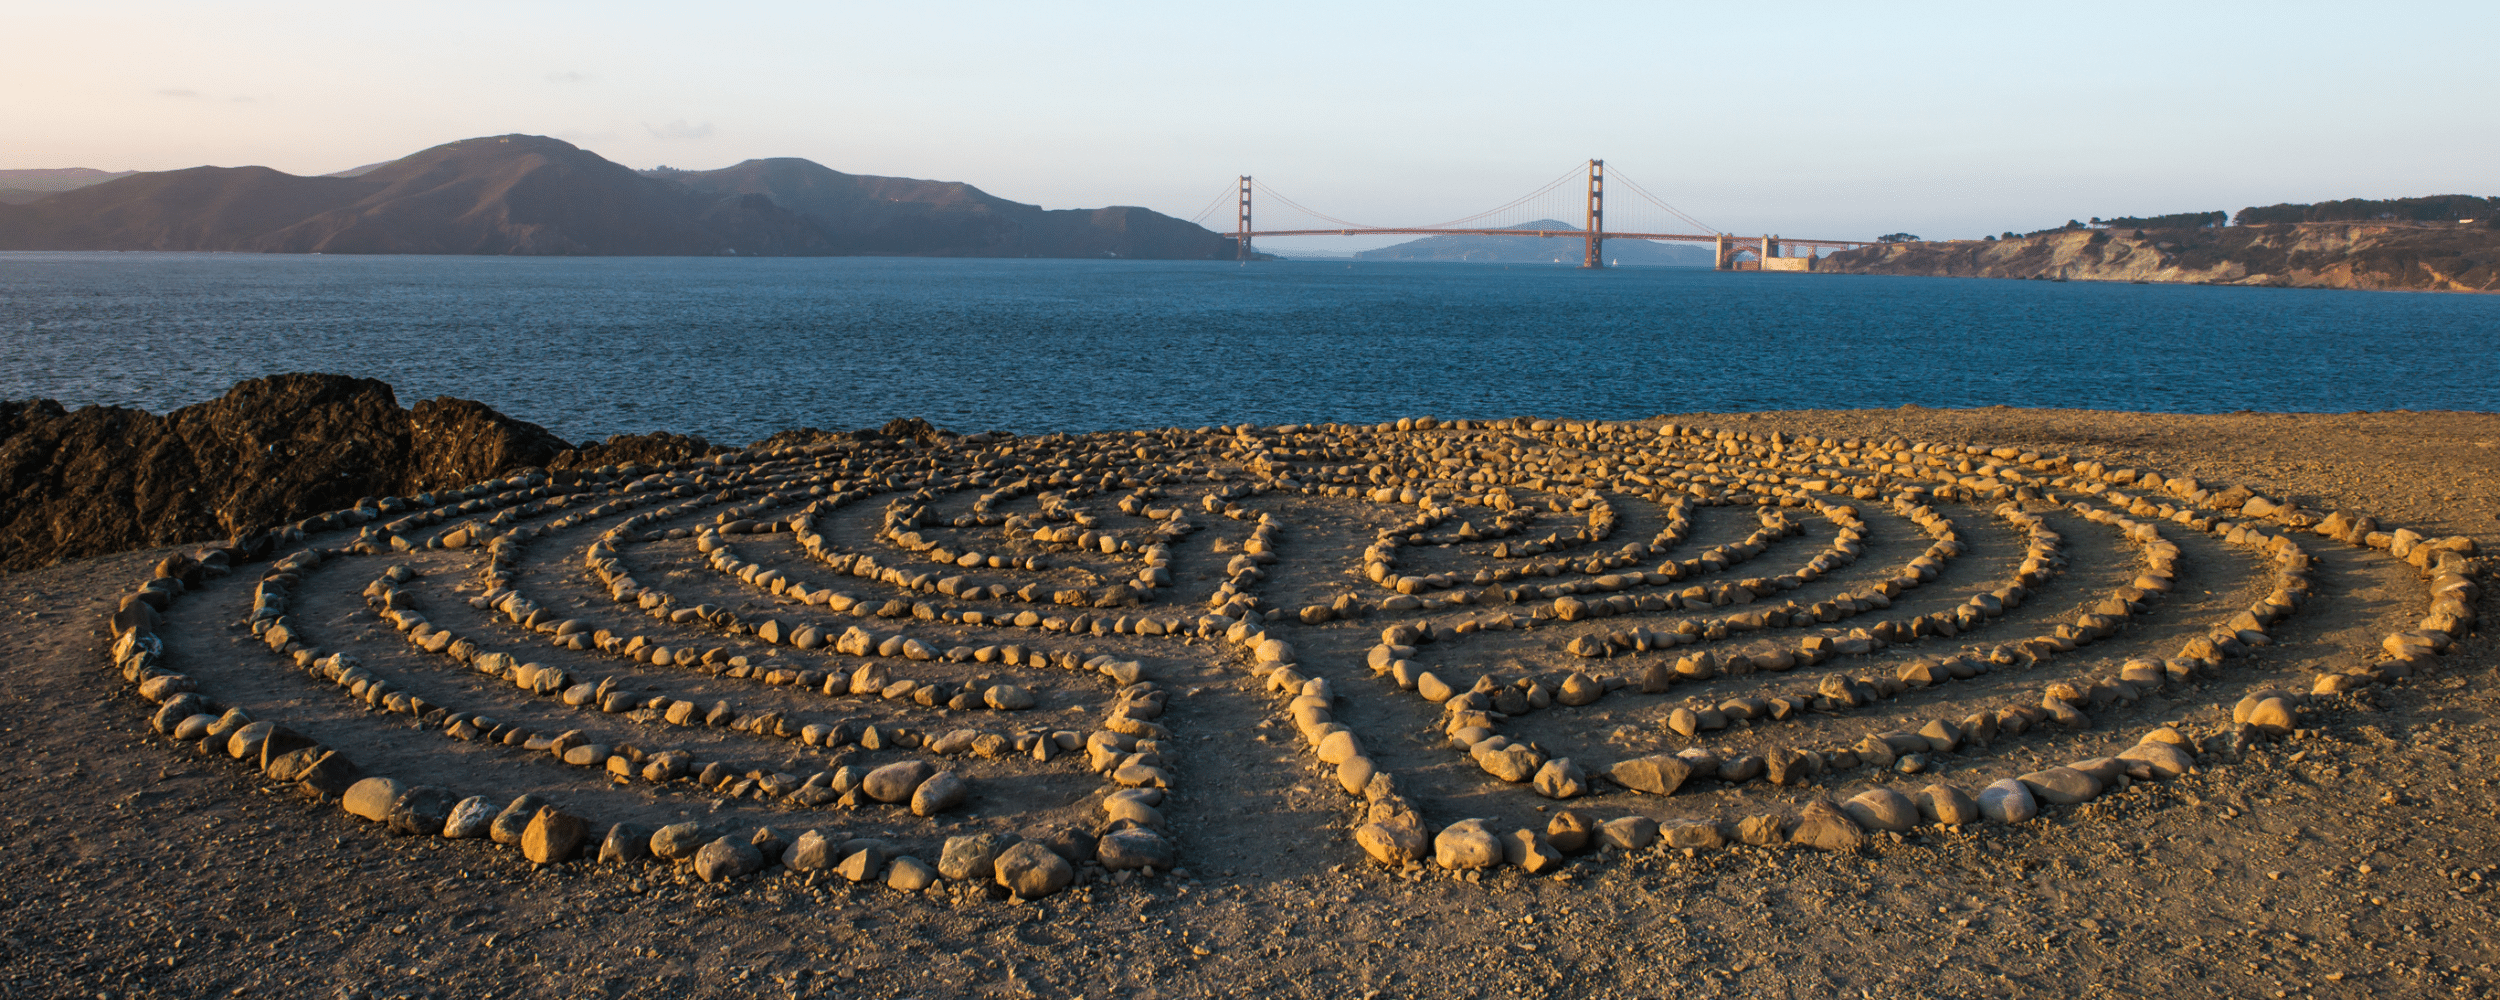 a rock formation at the mile rock beach in san francisco